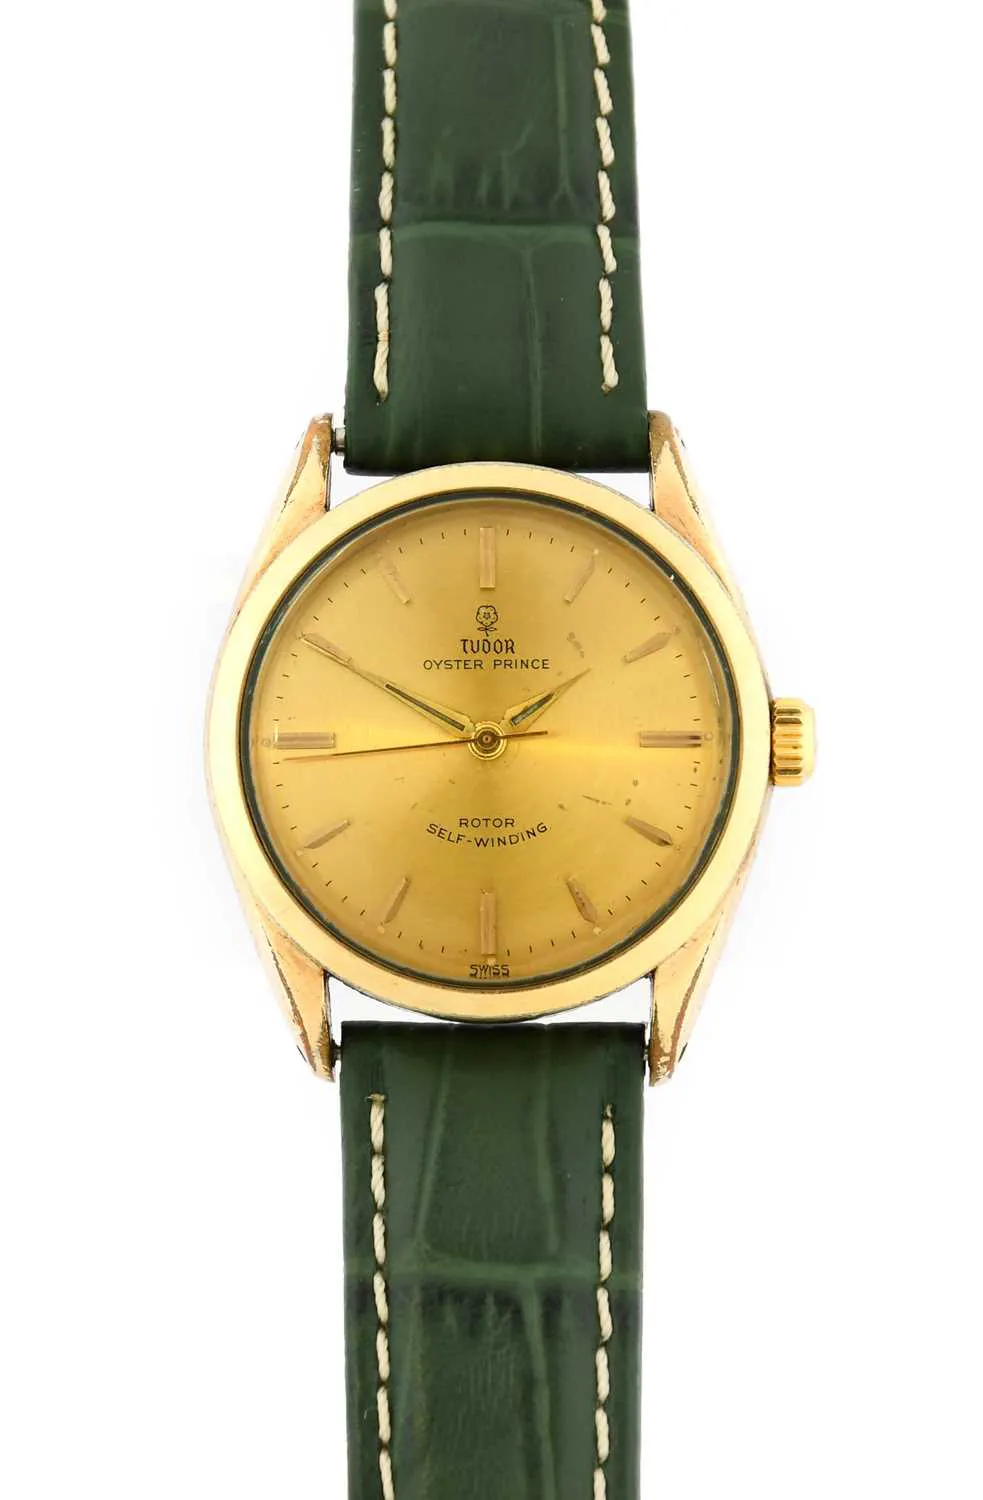 Tudor Oyster Prince 7965 33mm Yellow gold Champagne